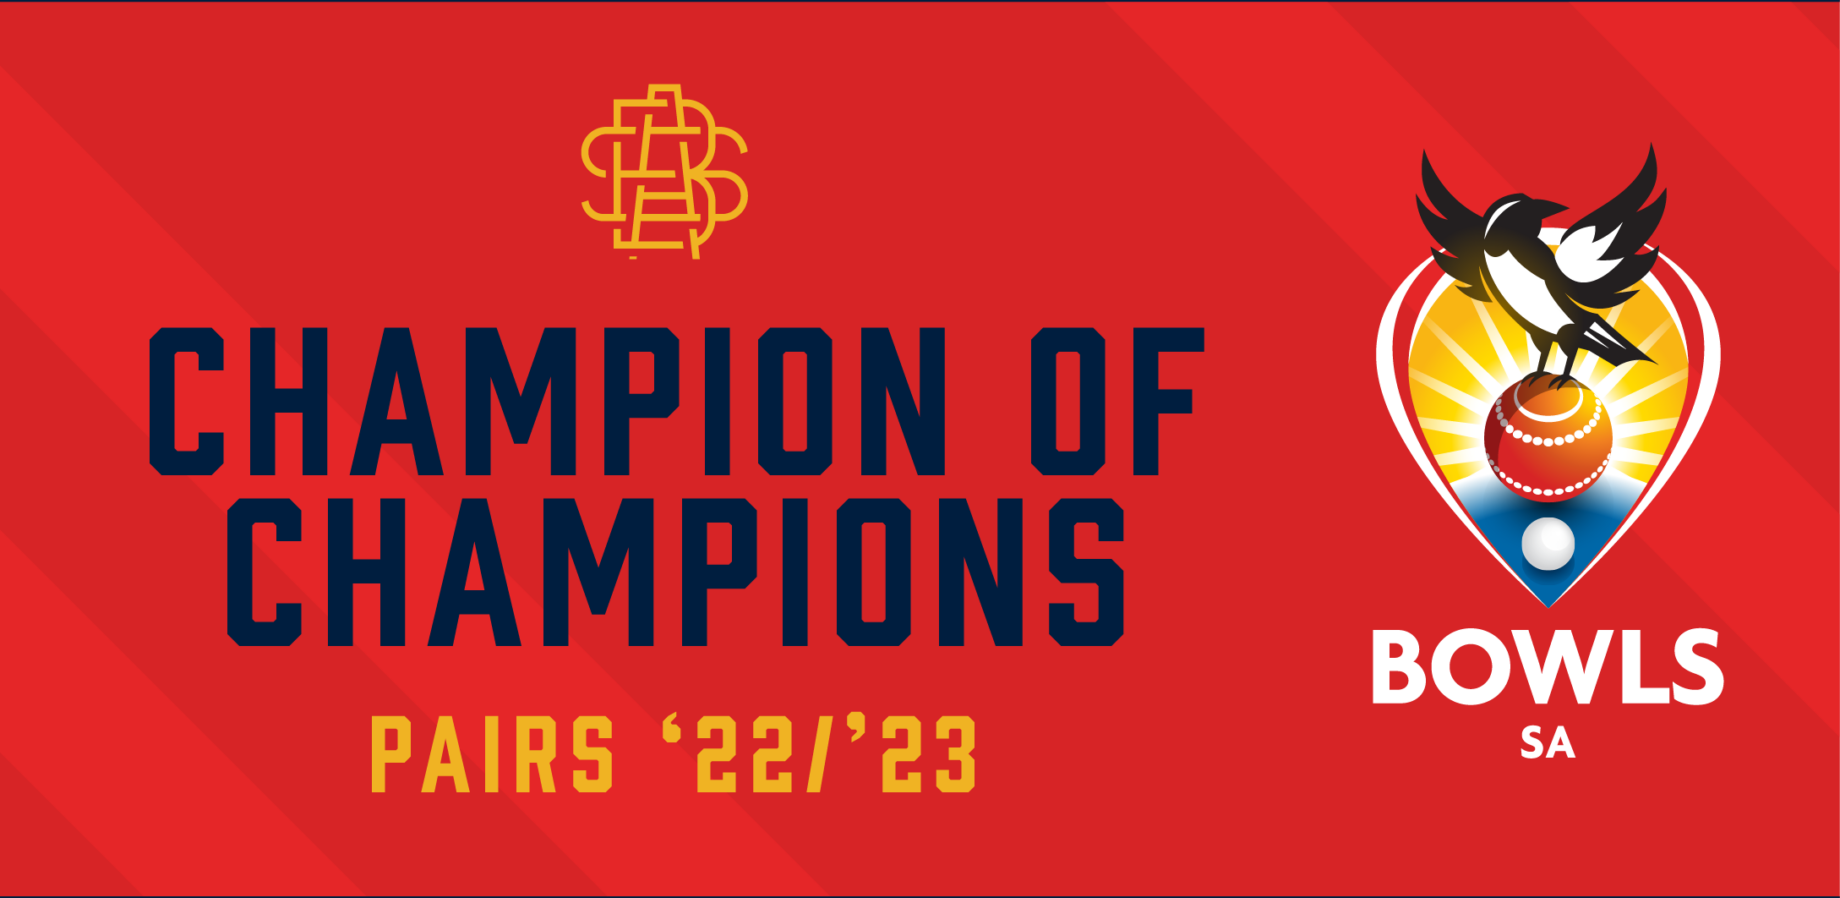 Champ of Champs - Pairs 22-23